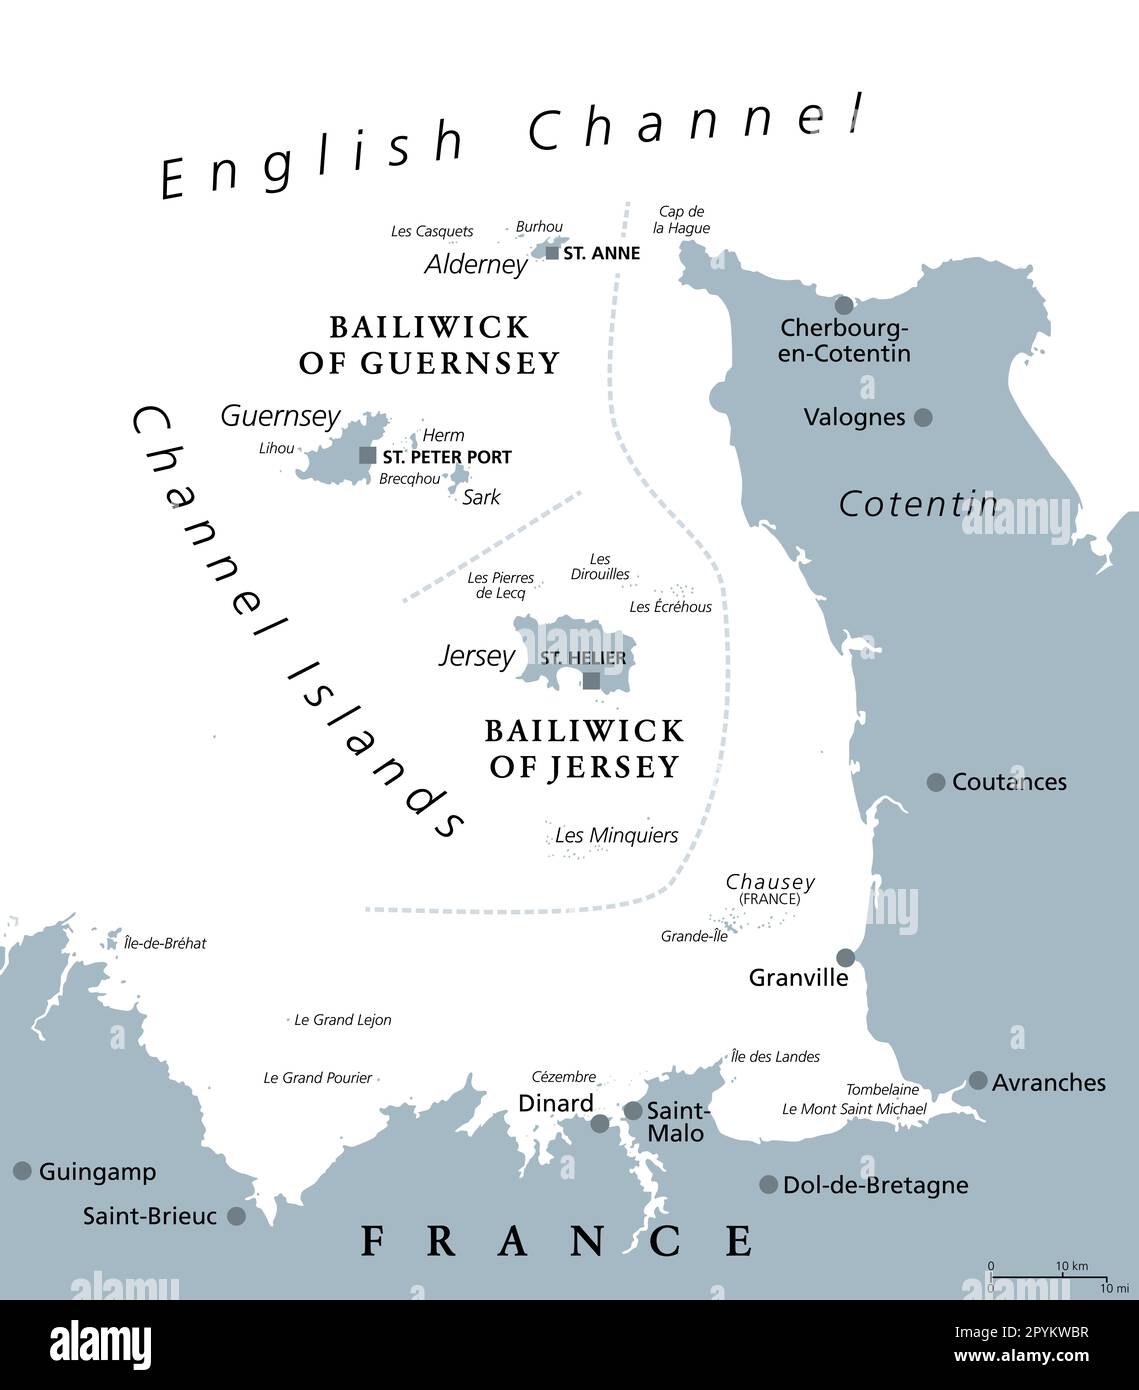 Channel Islands, gray political map. Crown Dependencies Bailiwick of Guernsey and Bailiwick of Jersey. Archipelago in the English Channel. Stock Photo